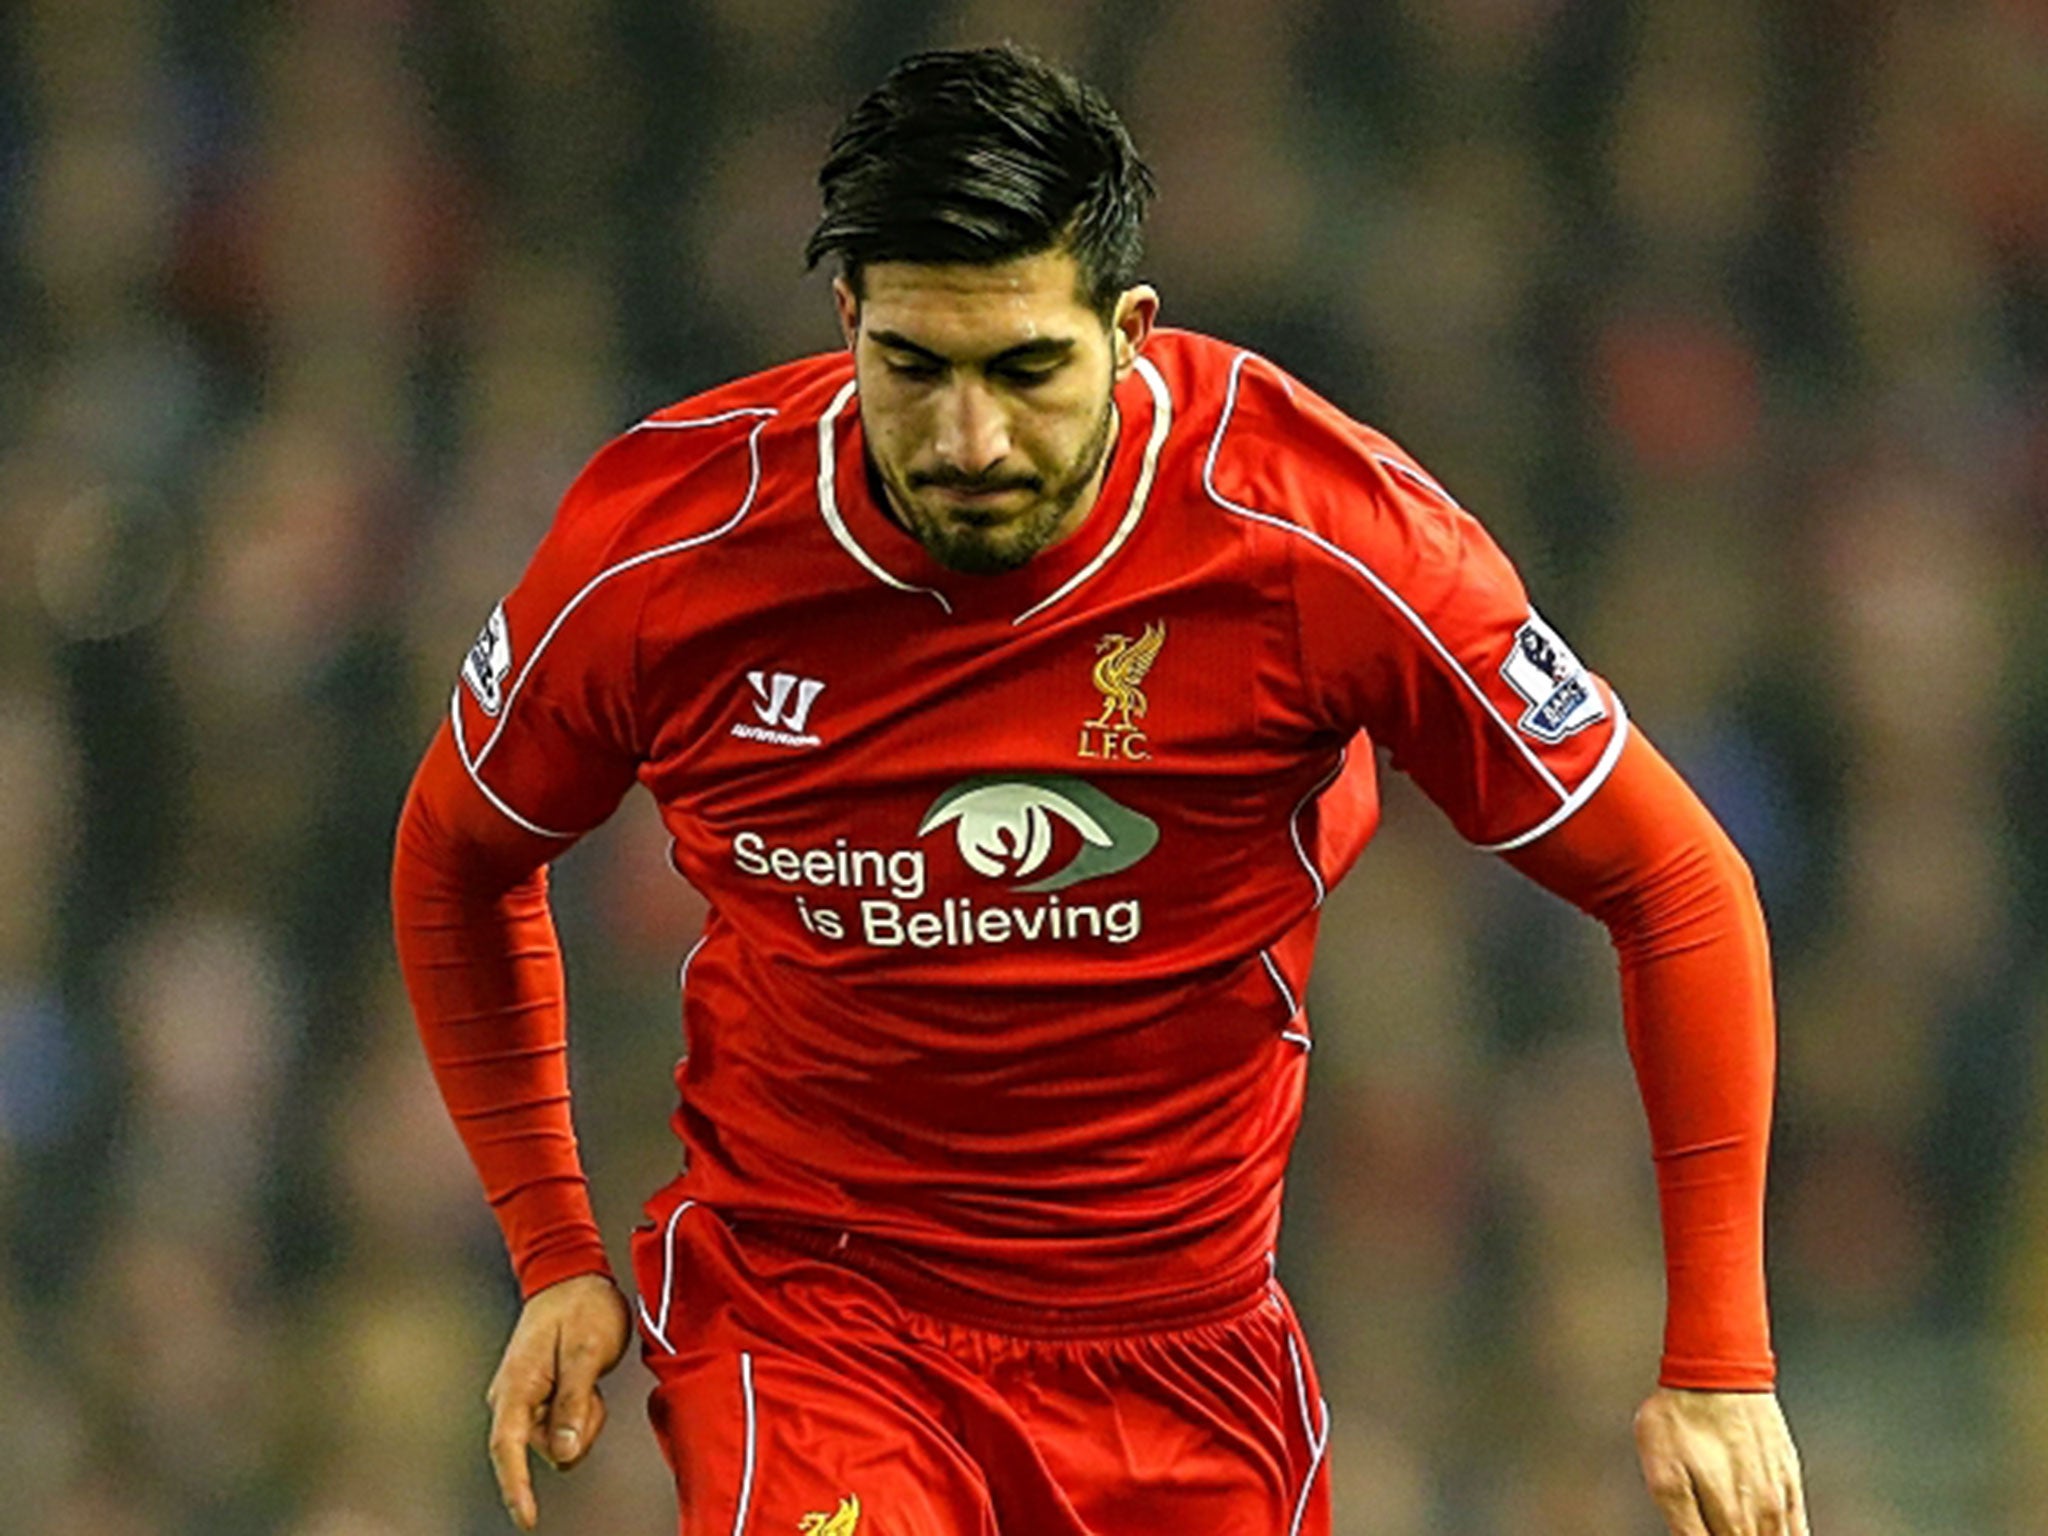 Emre Can, operating in a midfield shorn of Steven Gerrard, has provided an encouraging glimpse of Liverpool’s future